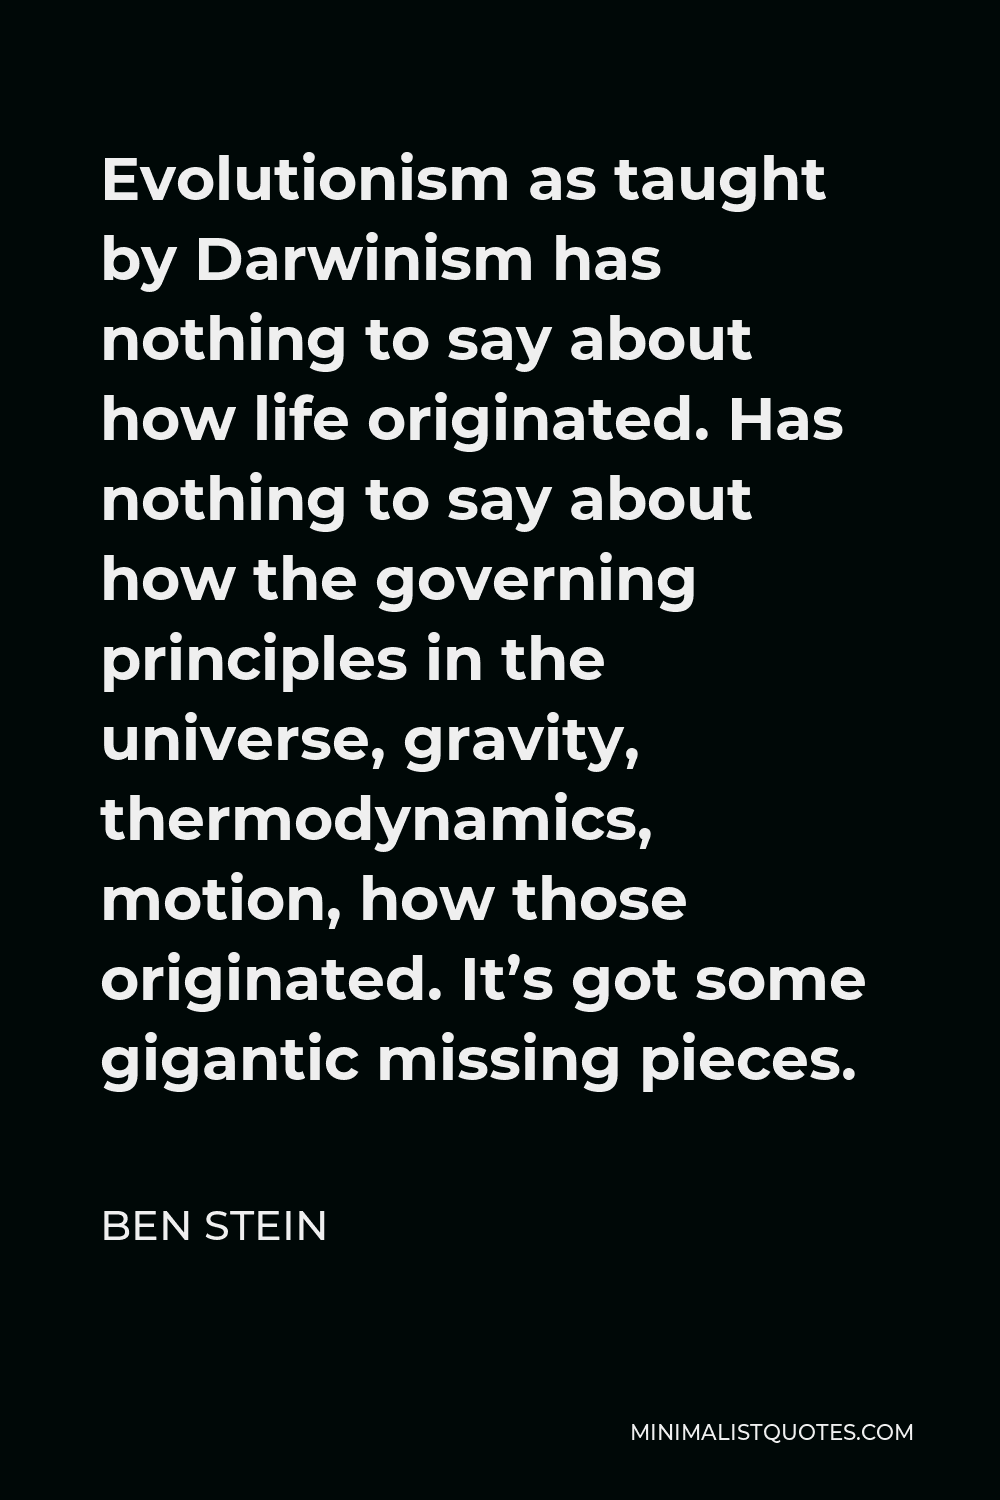 Ben Stein Quote - Evolutionism as taught by Darwinism has nothing to say about how life originated. Has nothing to say about how the governing principles in the universe, gravity, thermodynamics, motion, how those originated. It’s got some gigantic missing pieces.